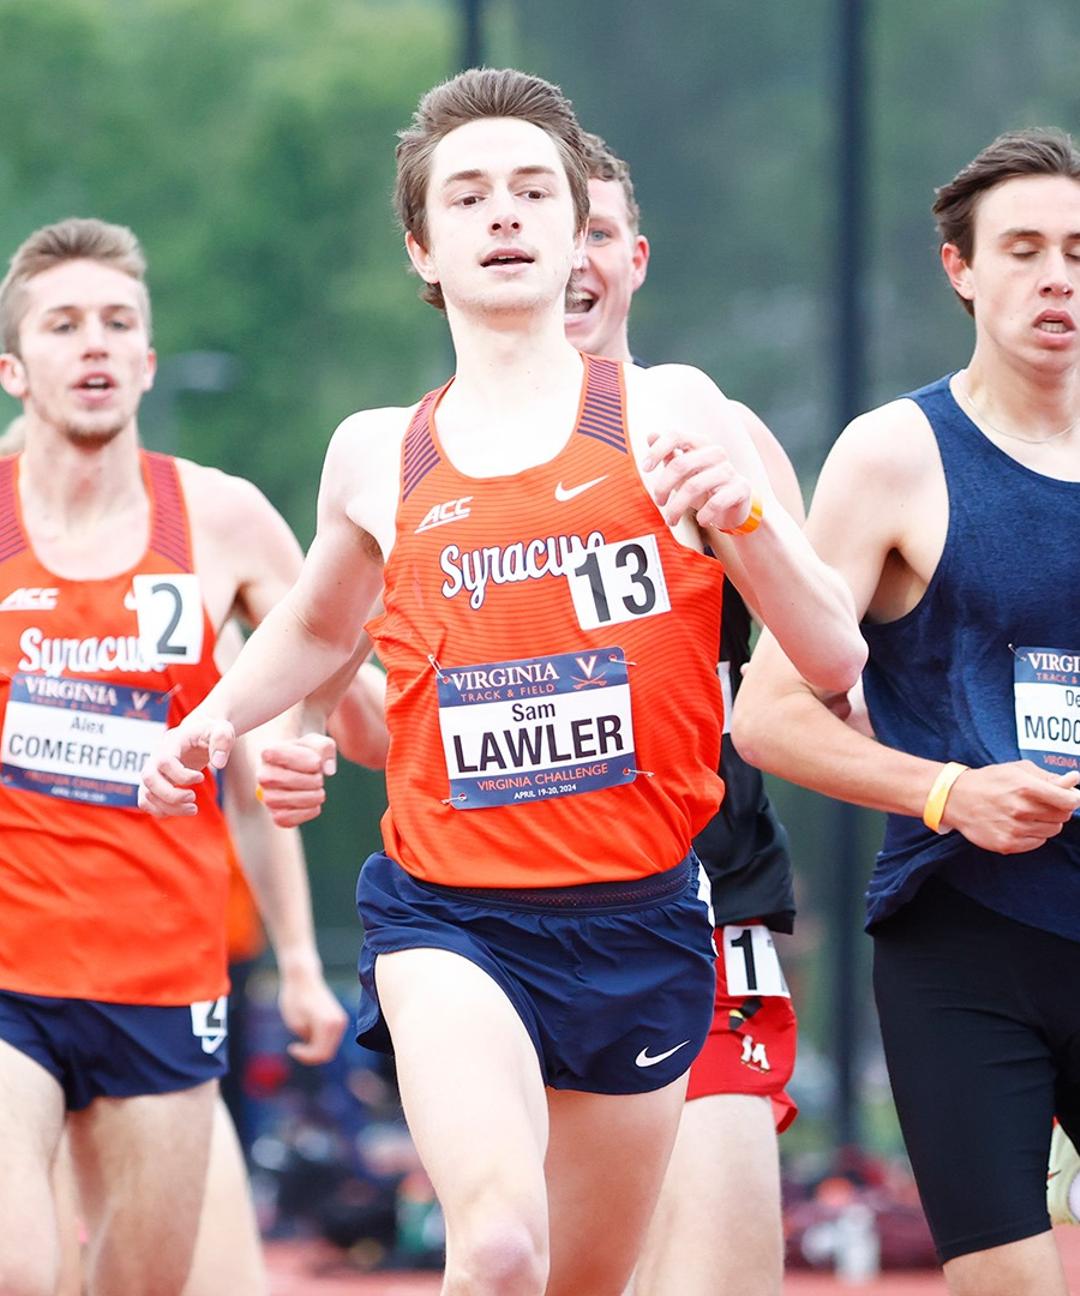 Image related to Lawler and Anderson Race on Night 1 of NCAAs